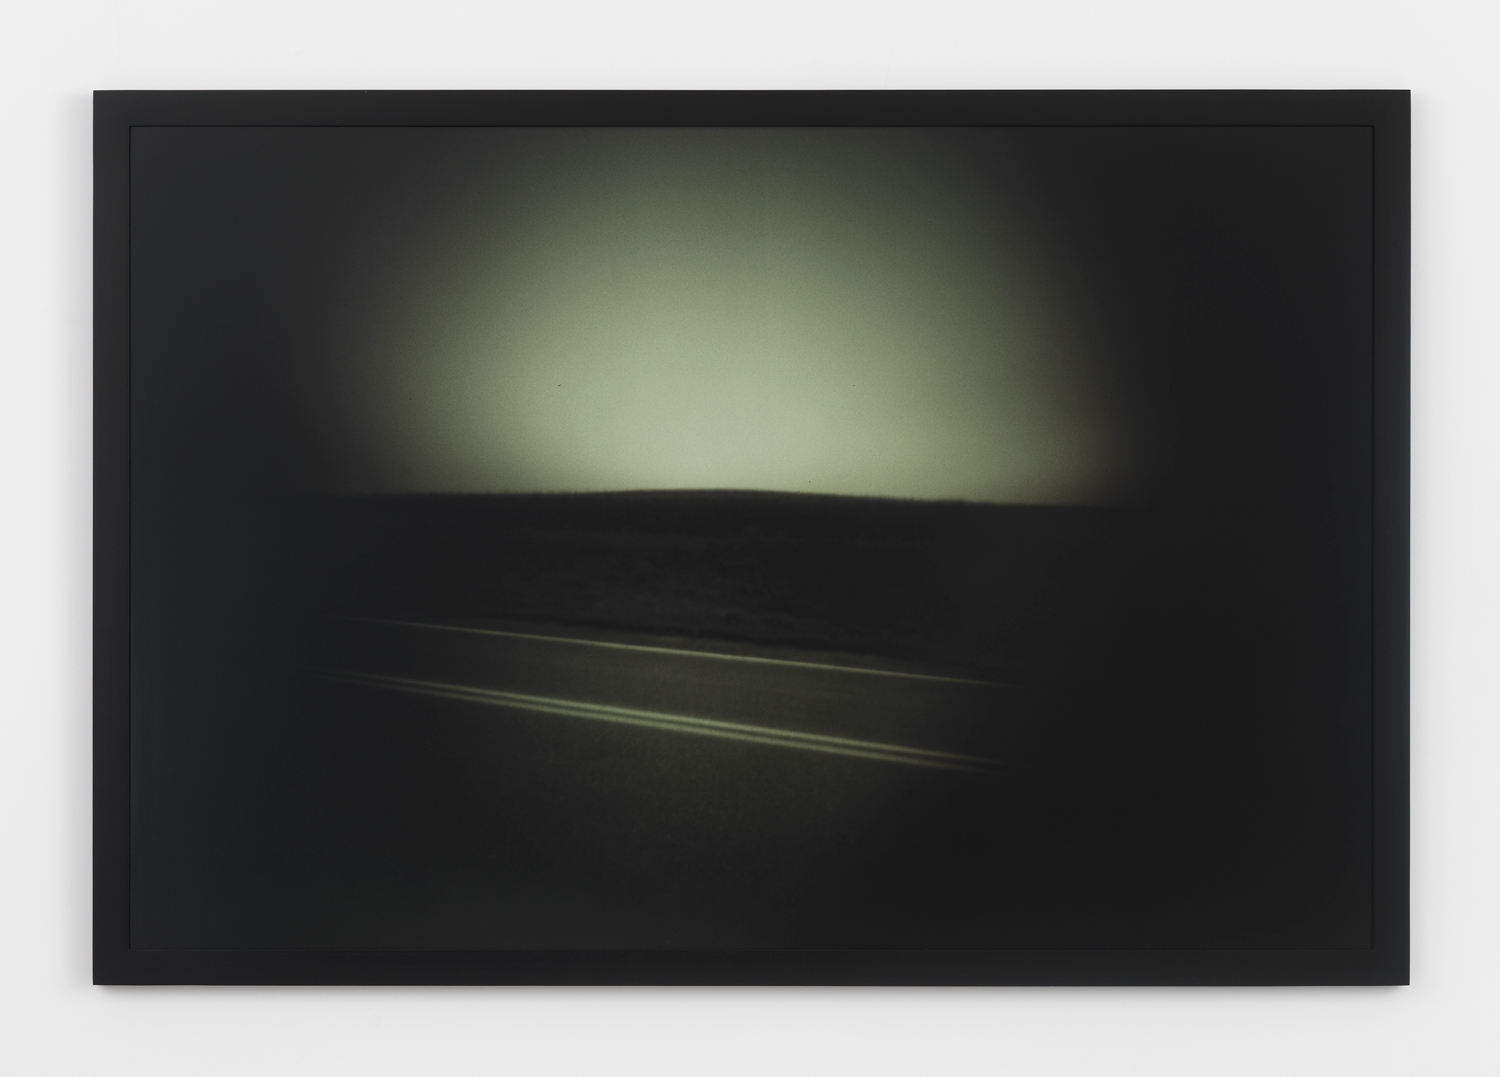 Barbara Ess, Highway, 1995, c-print, 40h x 60w in. Artist Print 2 from an Edition of 4 + 2 Artist Prints.